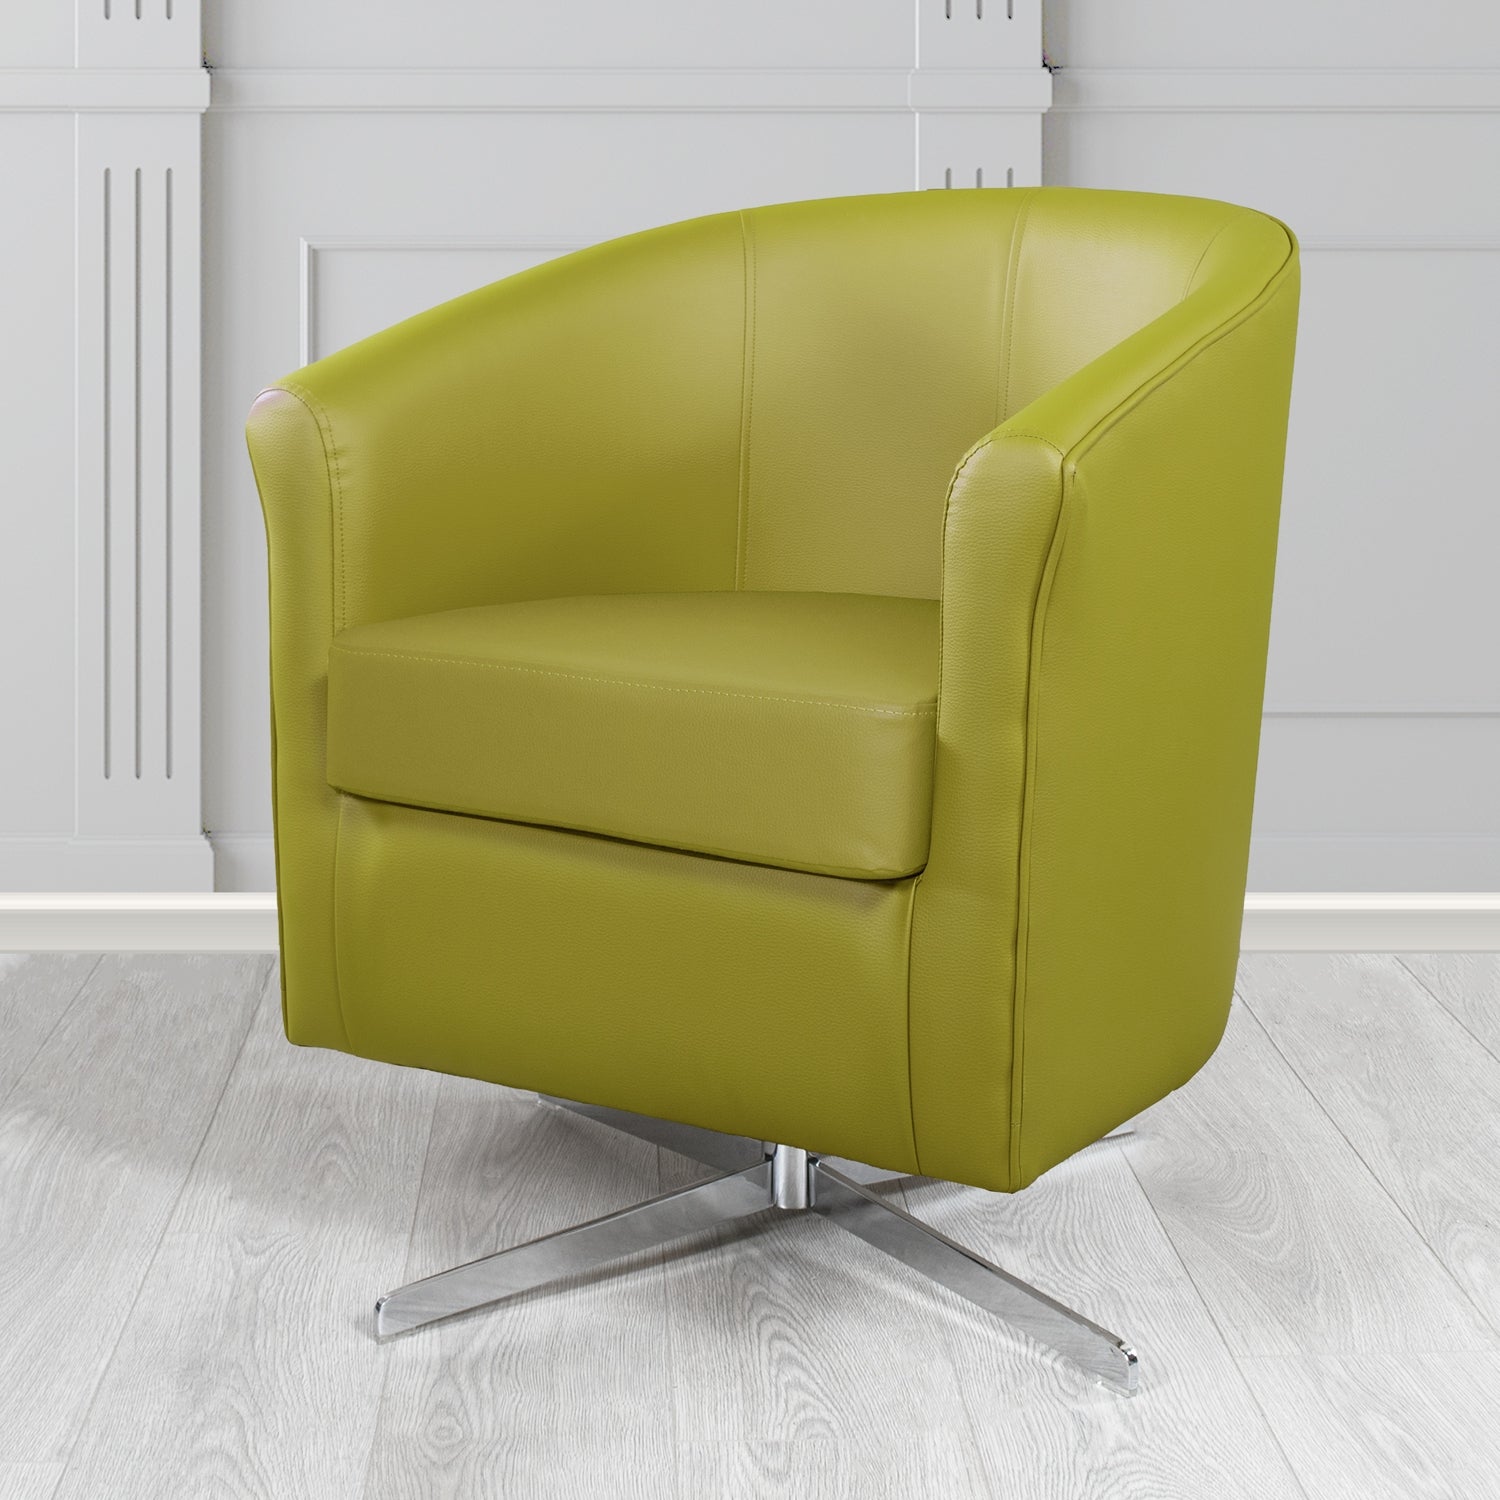 Cannes Swivel Tub Chair in Just Colour Dijon Crib 5 Faux Leather